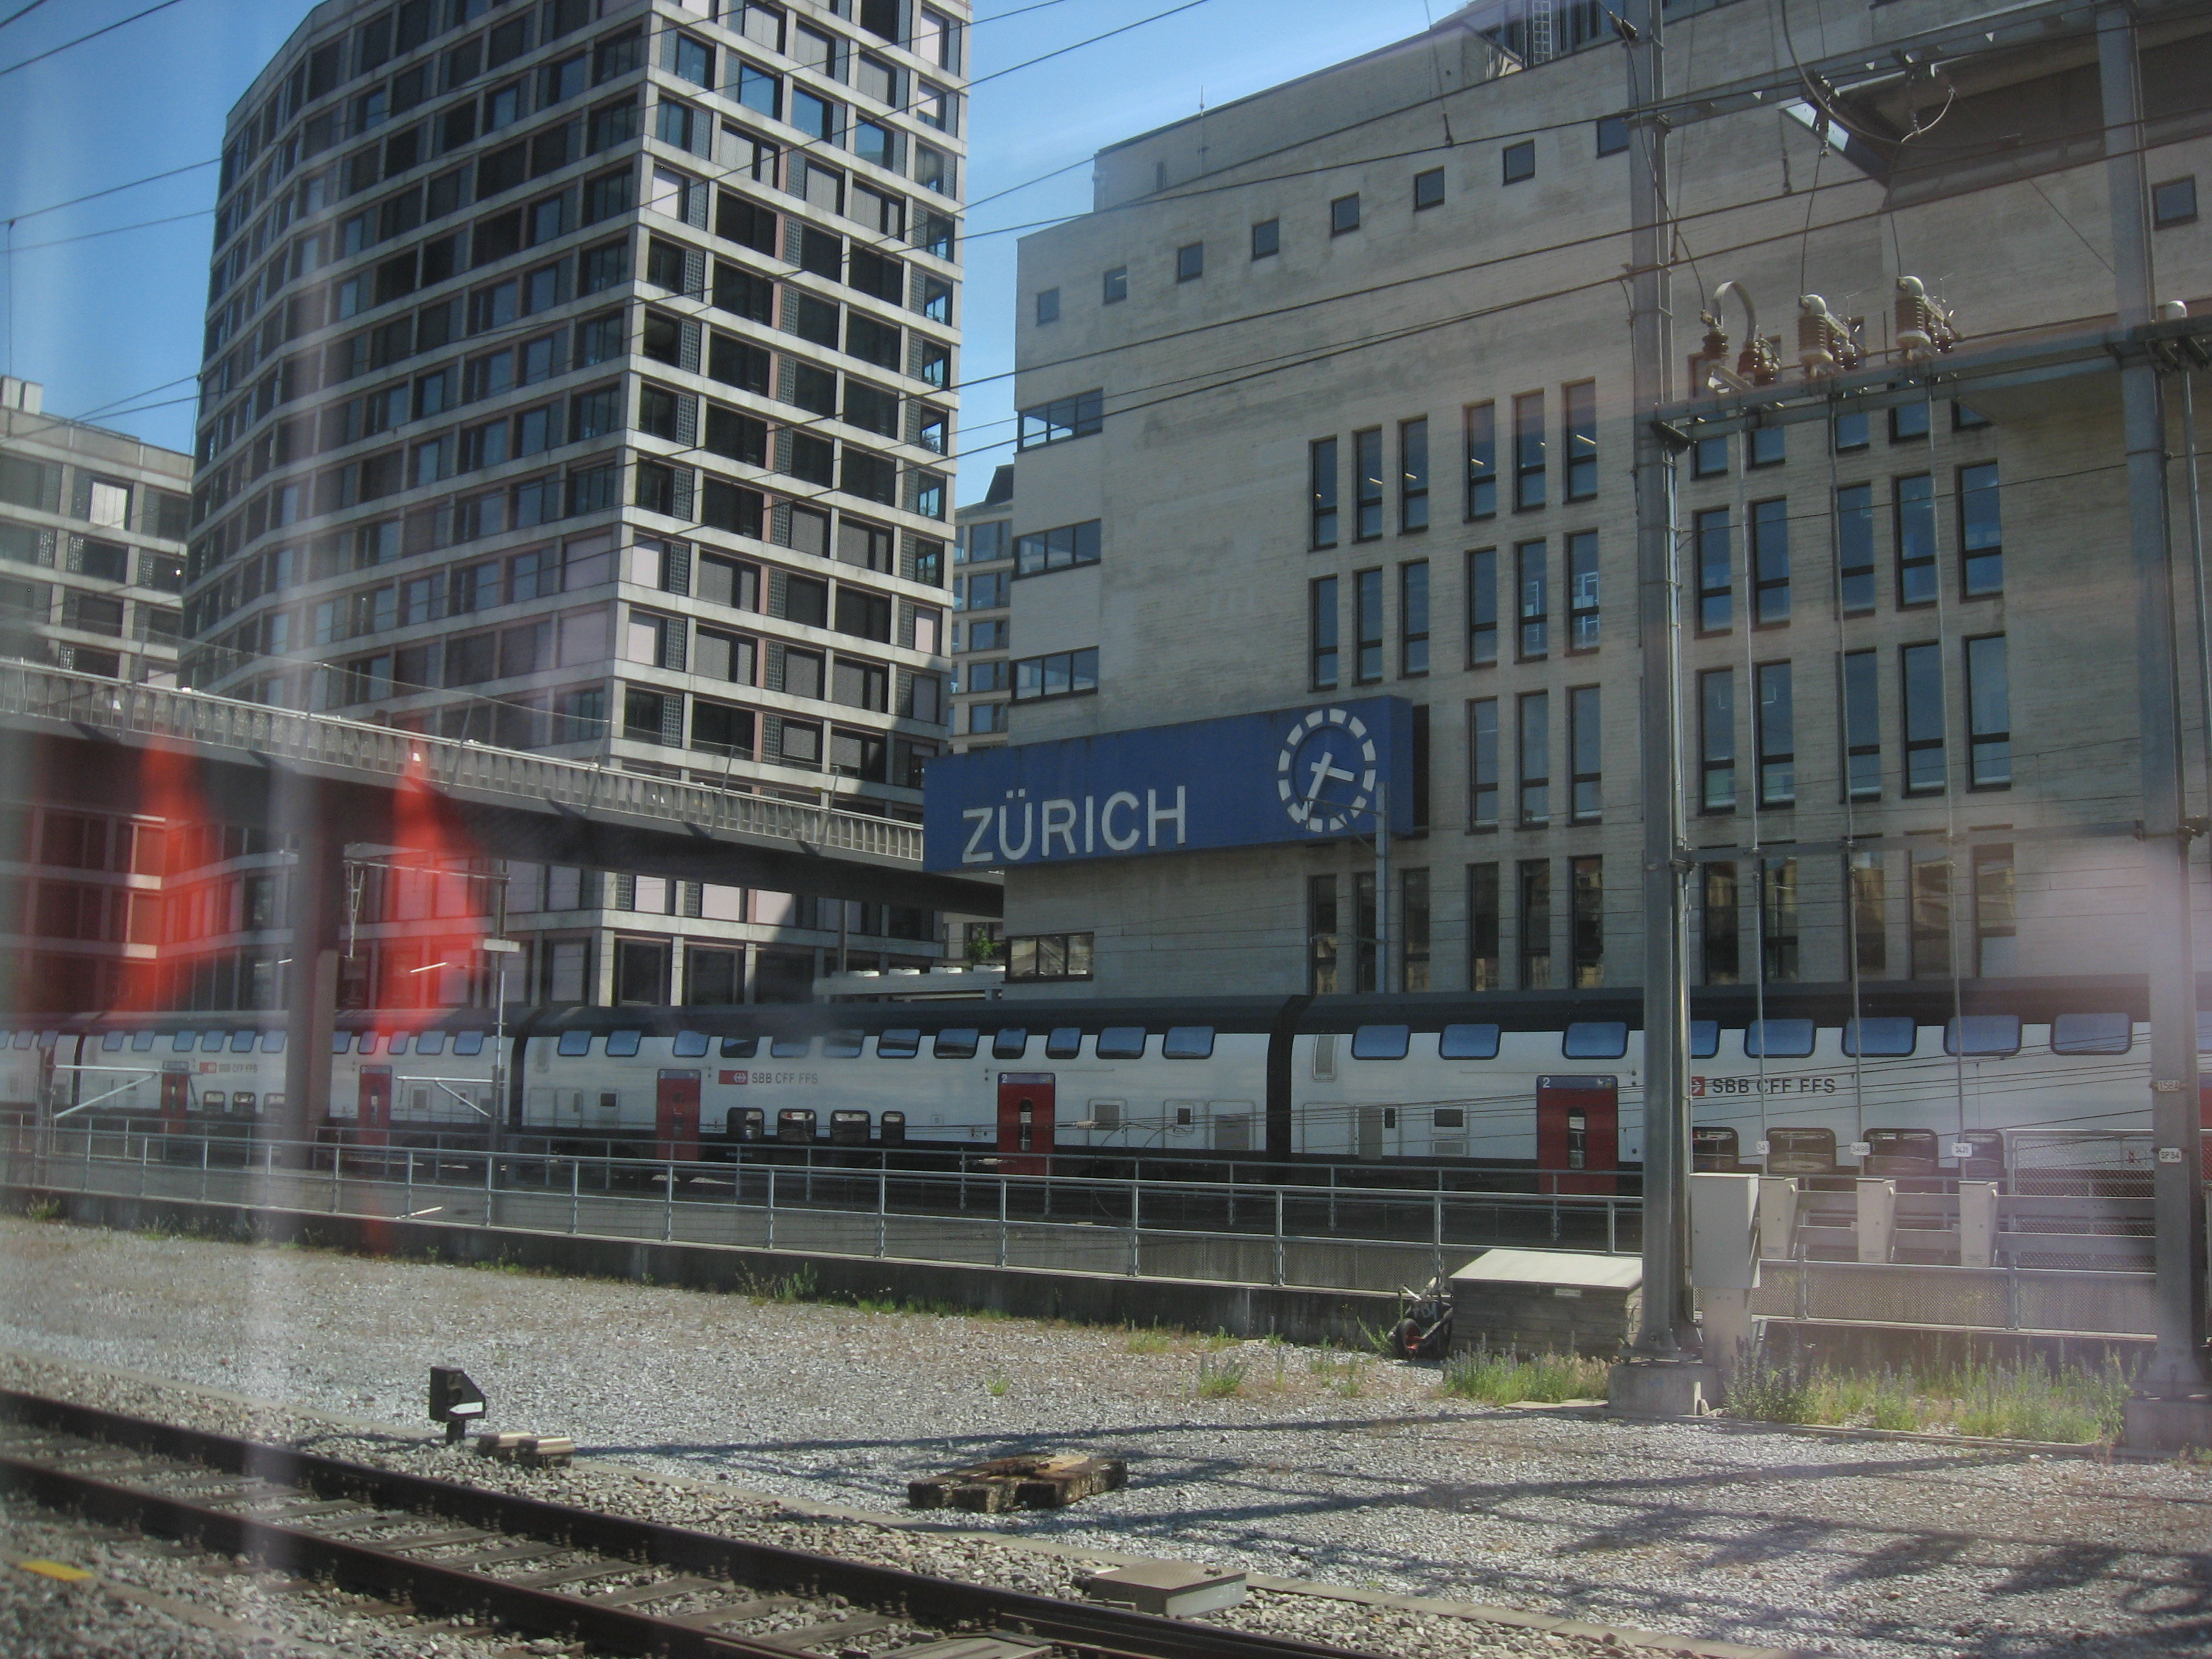 A building with a big blue sign with white text that says 'ZÜRICH'.